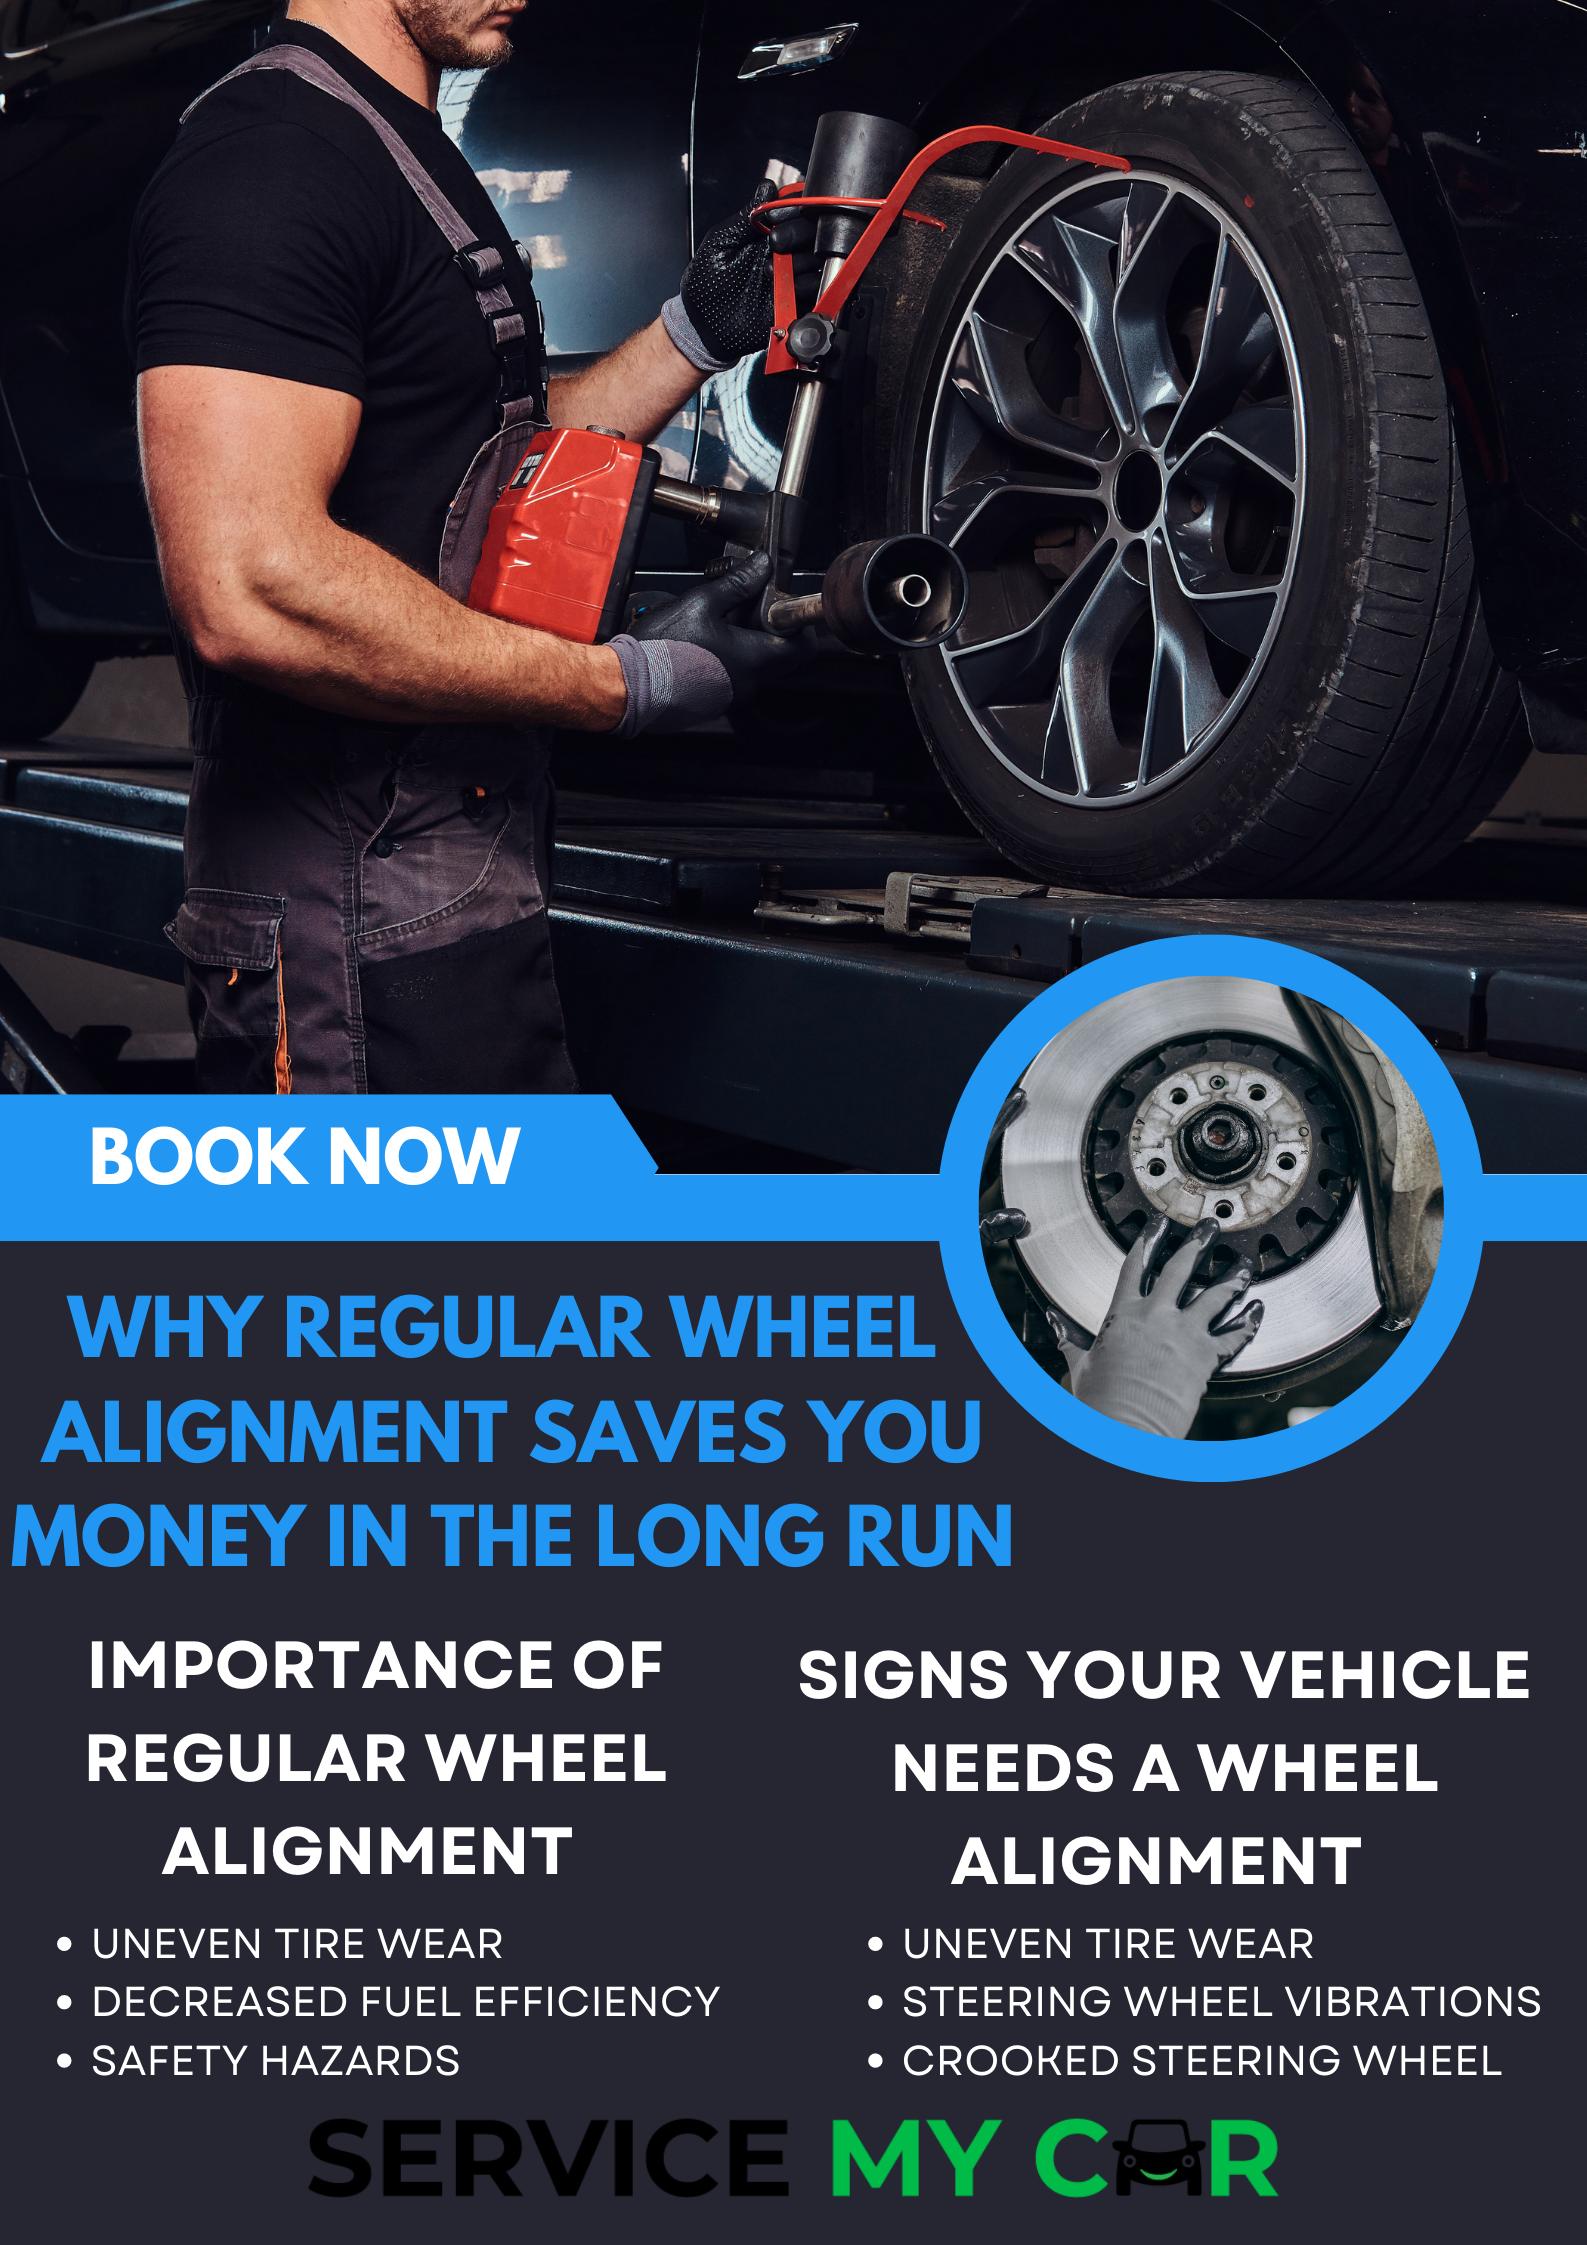 Why-Regular-Wheel-Alignment-Saves-You-Money-in-the-Long-Run.png